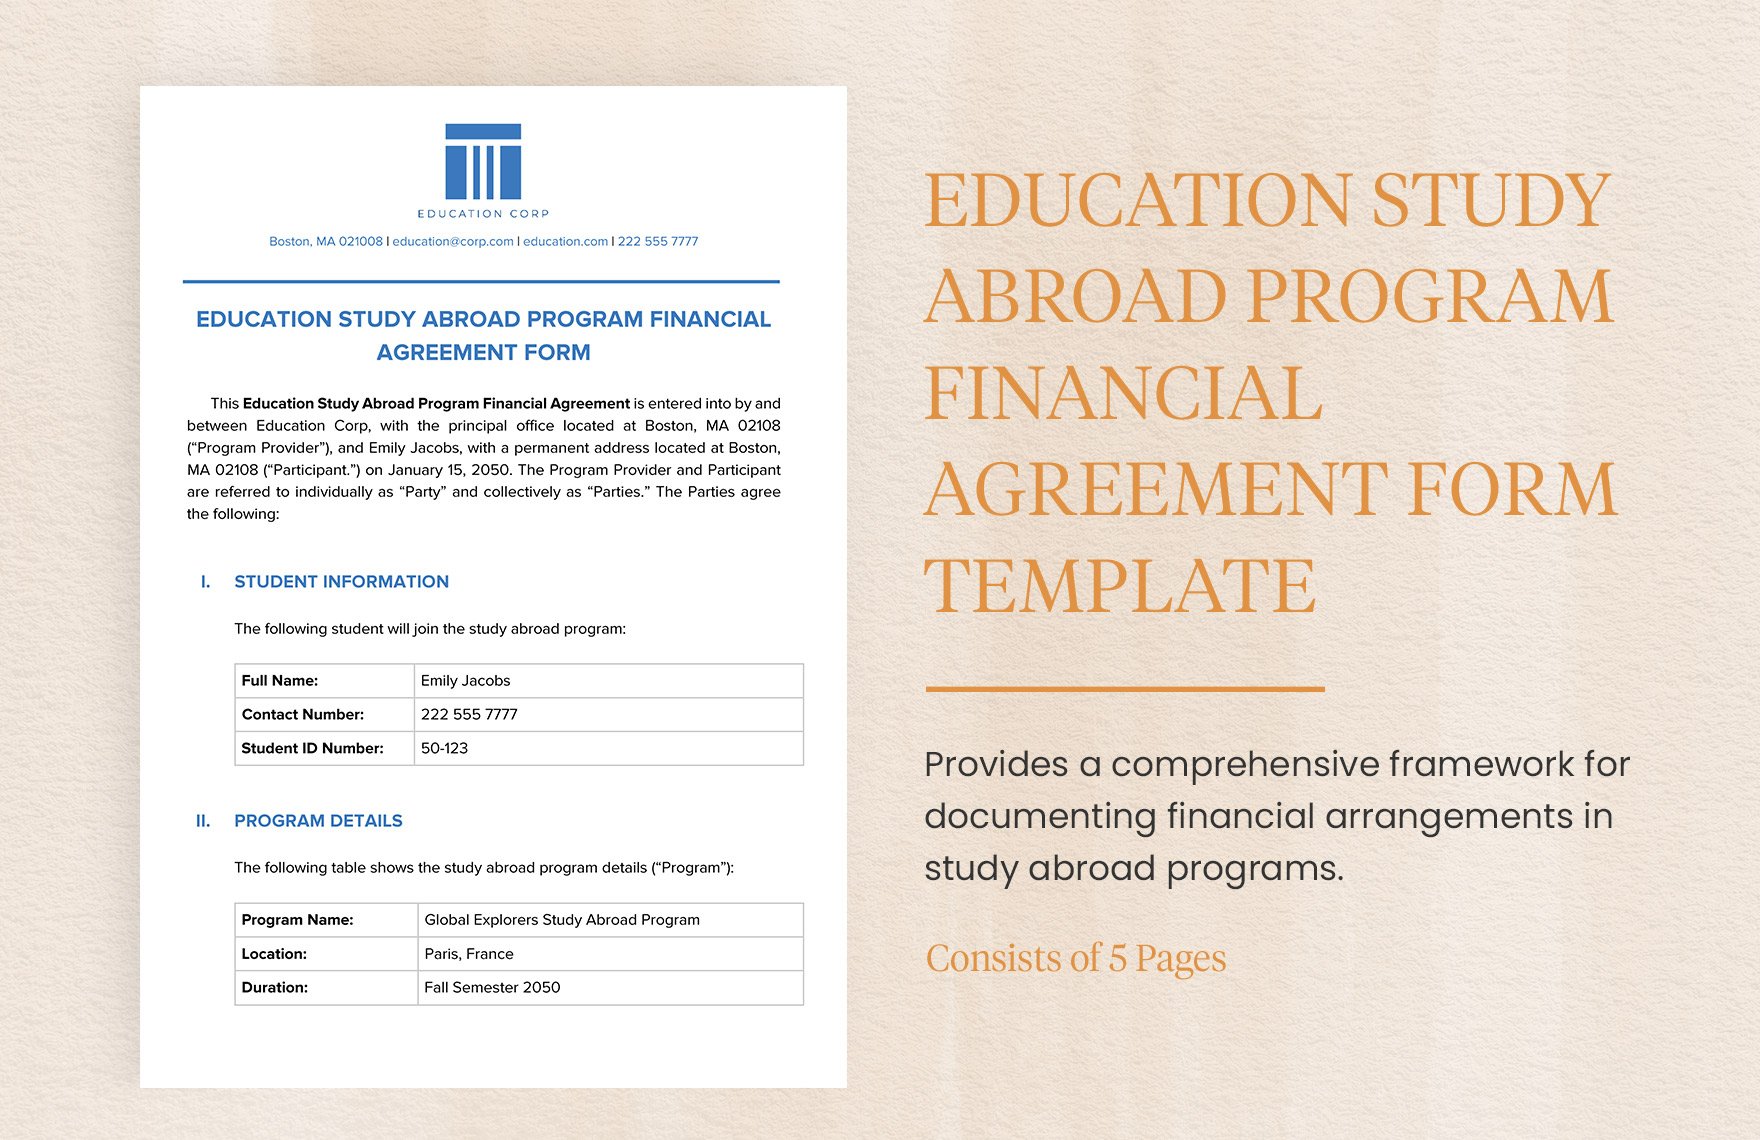 Education Study Abroad Program Financial Agreement Form Template in Word, Google Docs, PDF